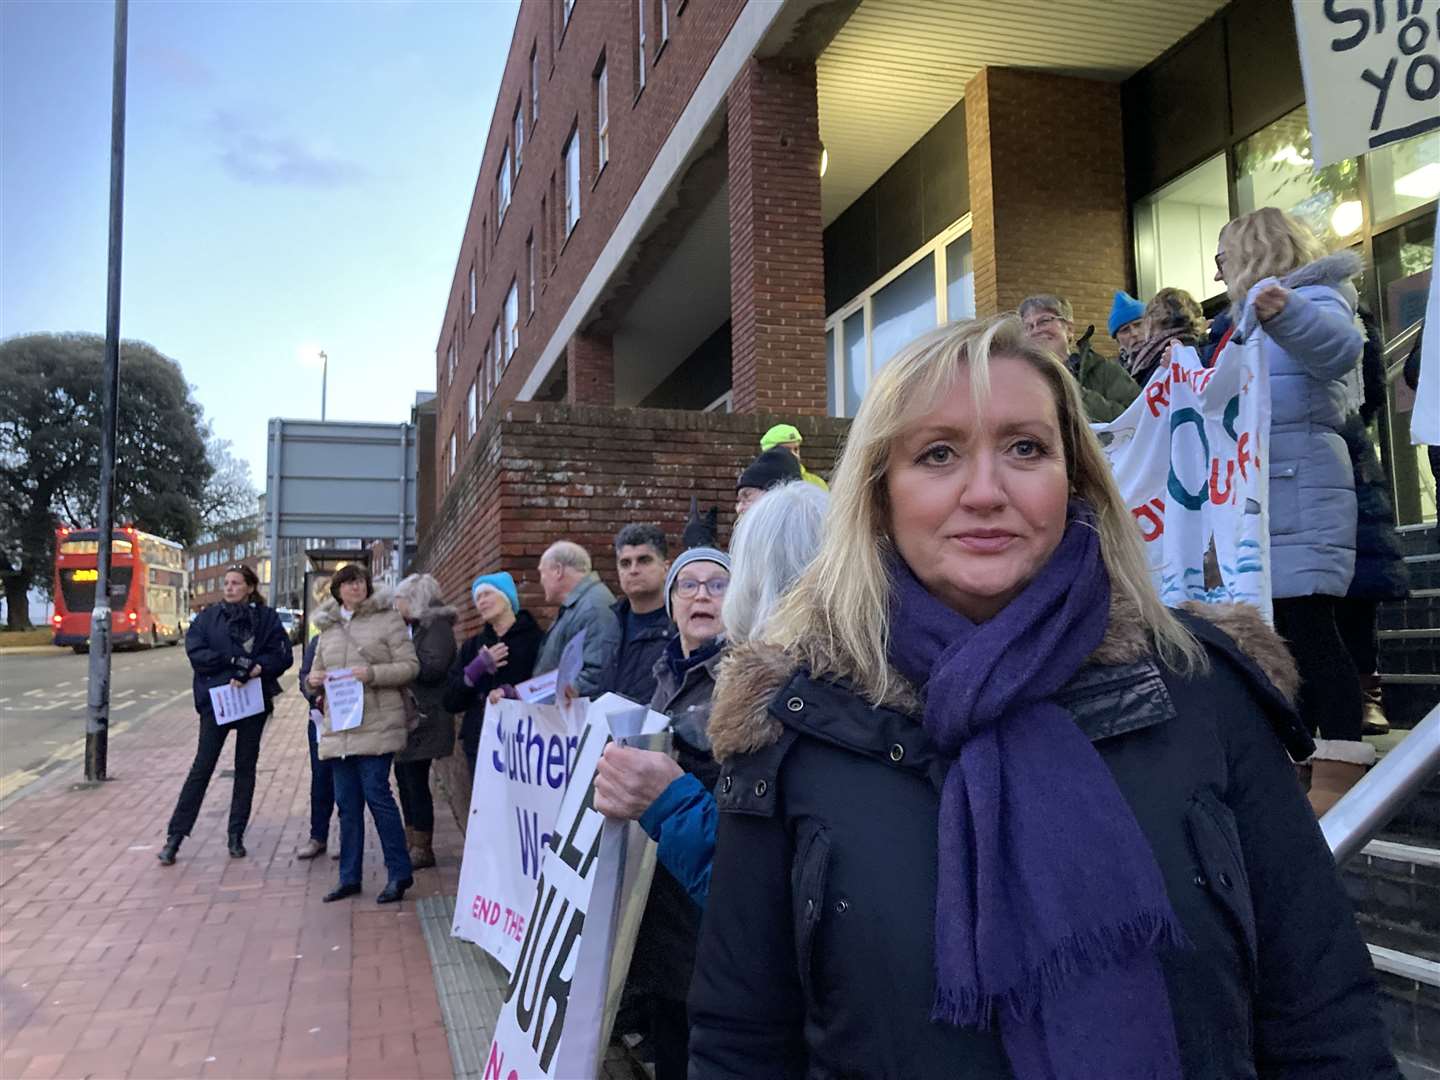 Julie Norburn-McRae was among the protesters outside the Thanet District Council's offices